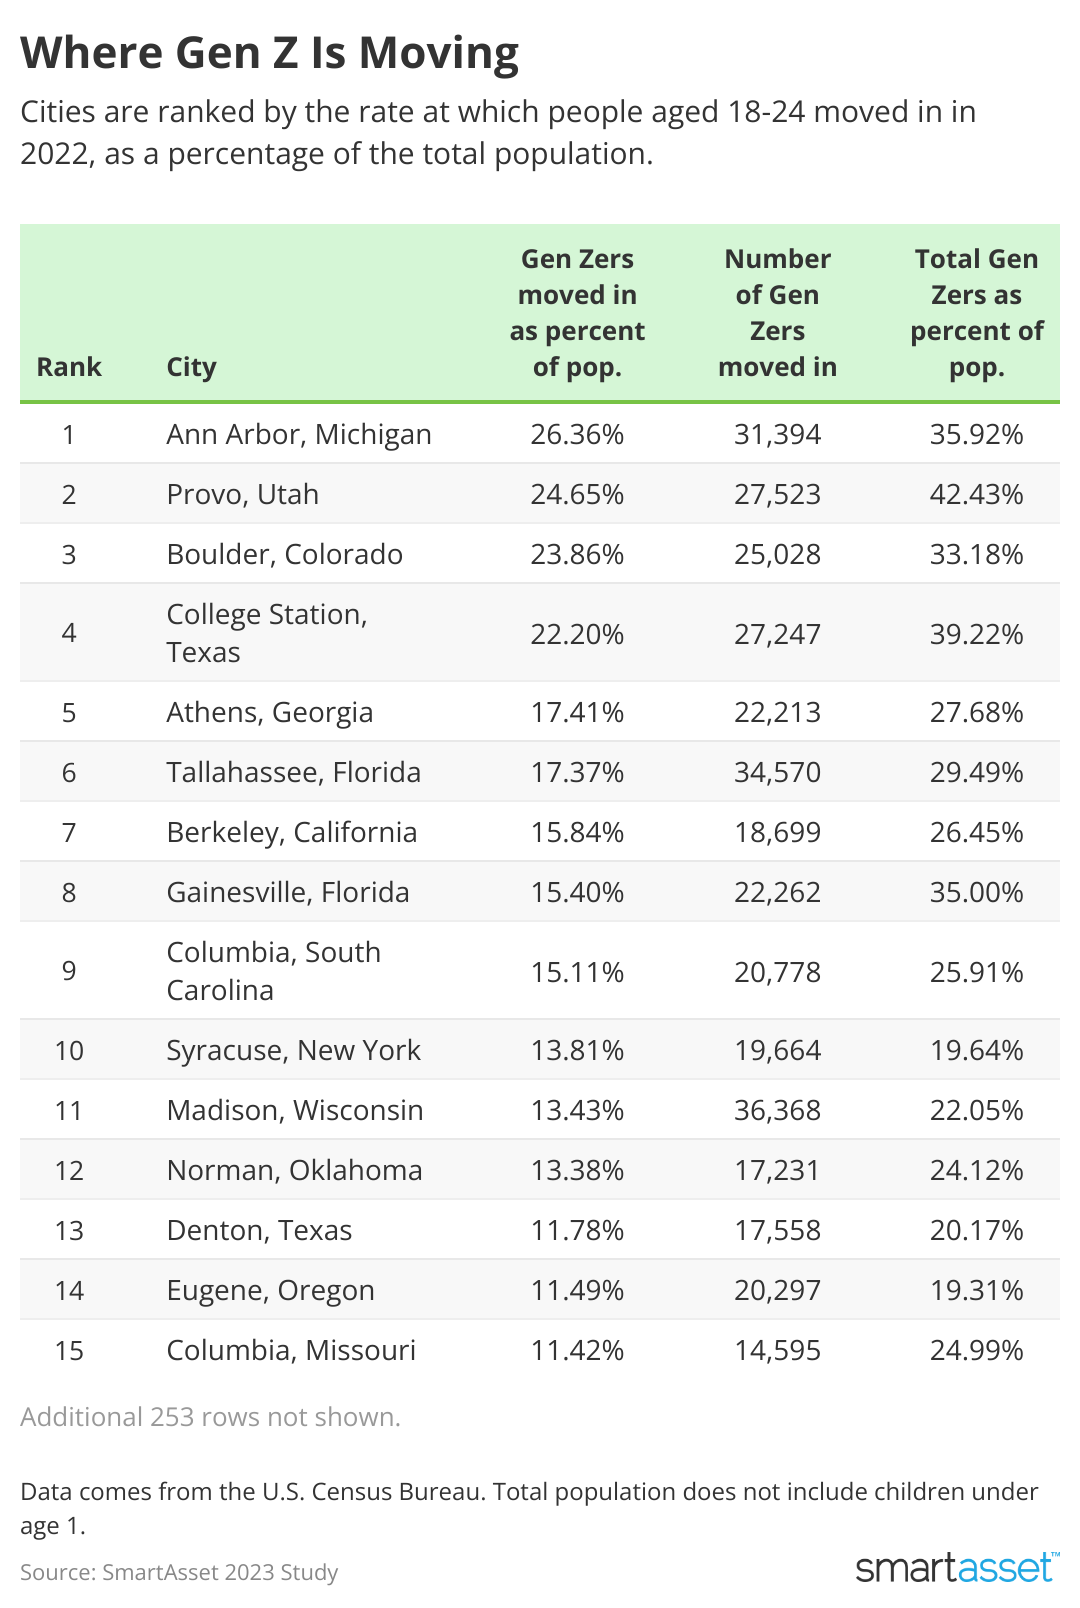 Table showing top 15 cities where gen Z is moving.